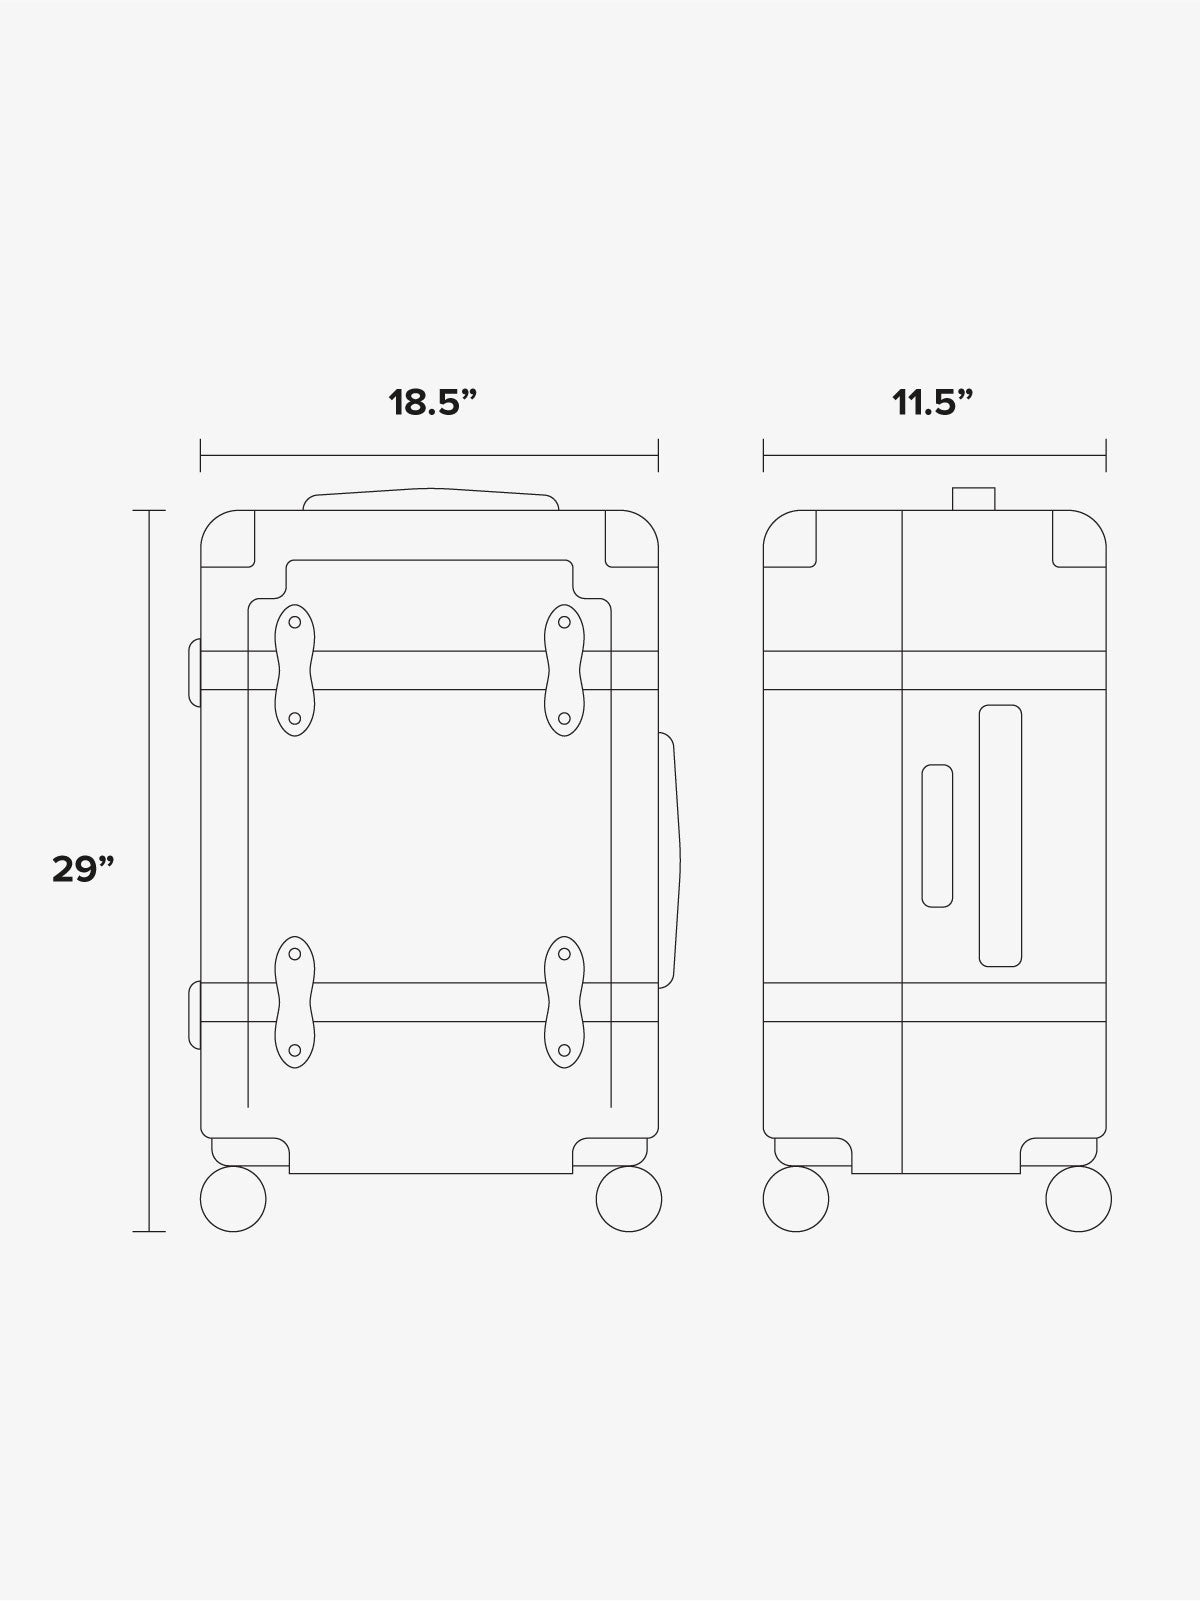 Trnk large luggage dimensions